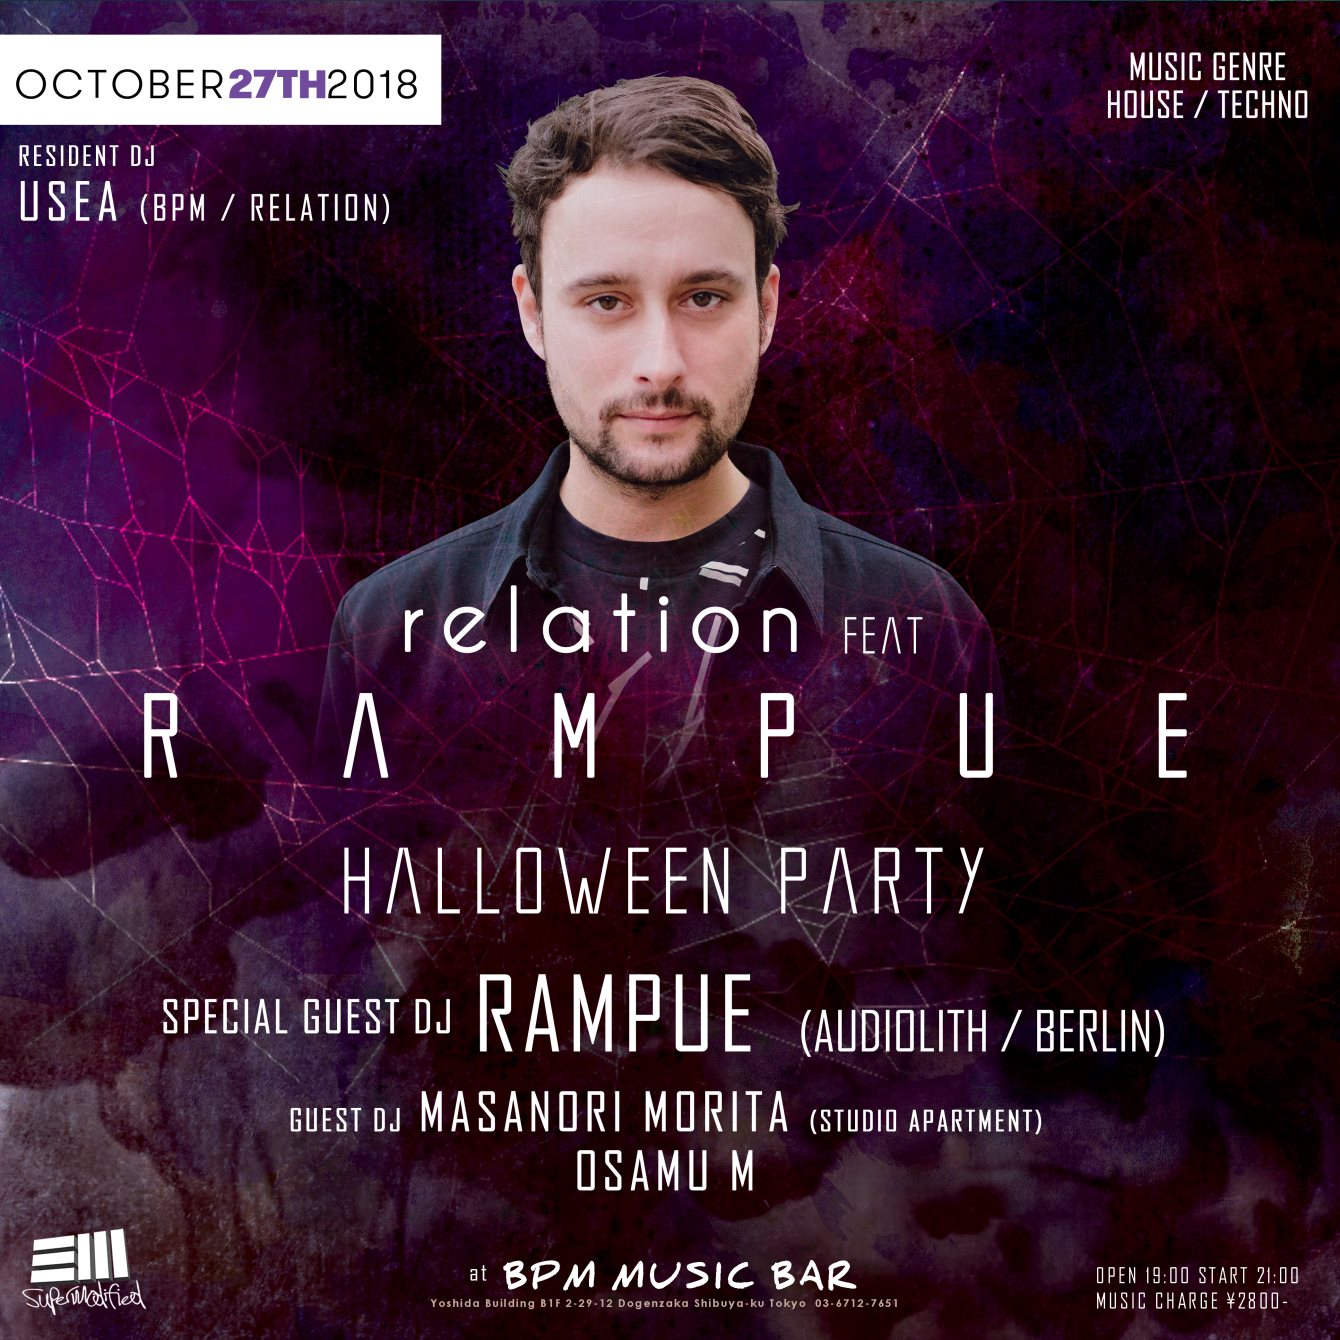 Relation feat. 'Rampue' (Audiolith / Berlin) -Halloween Party- - Flyer front